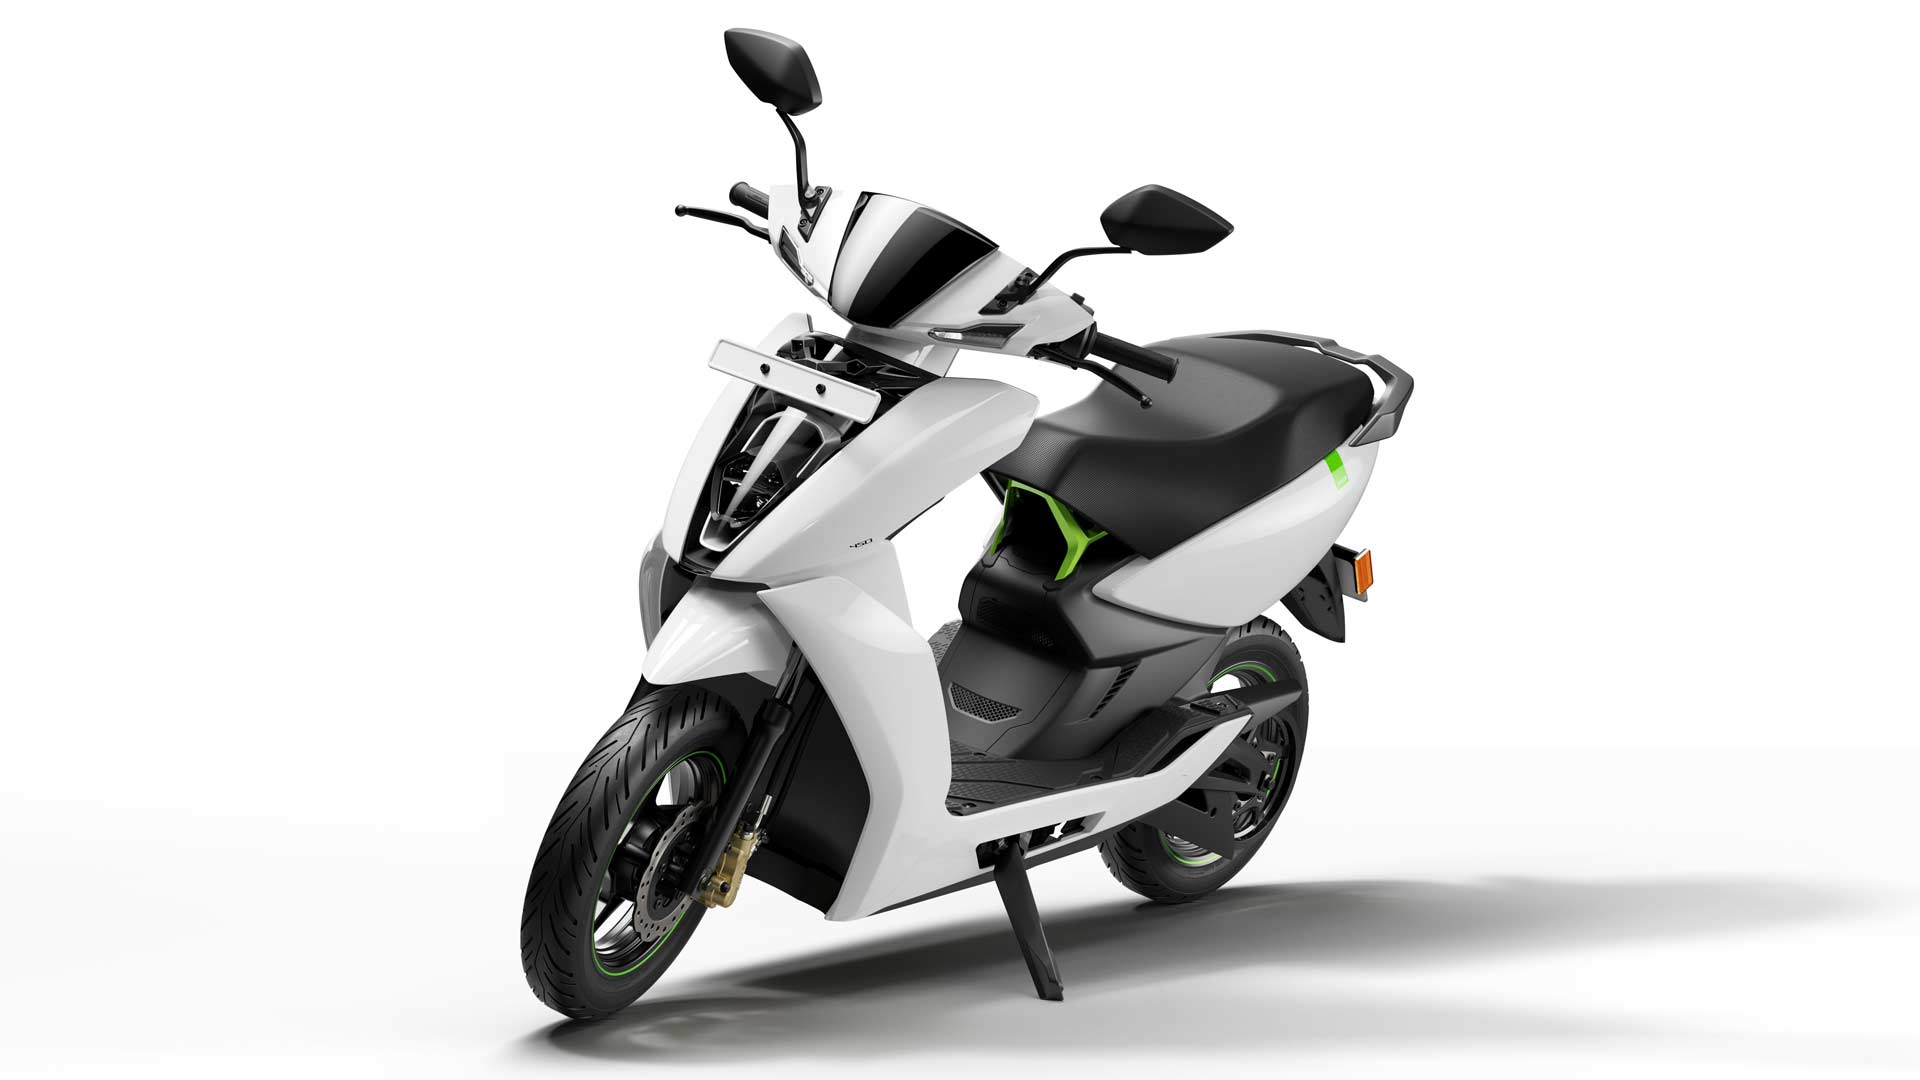 Ather-S450